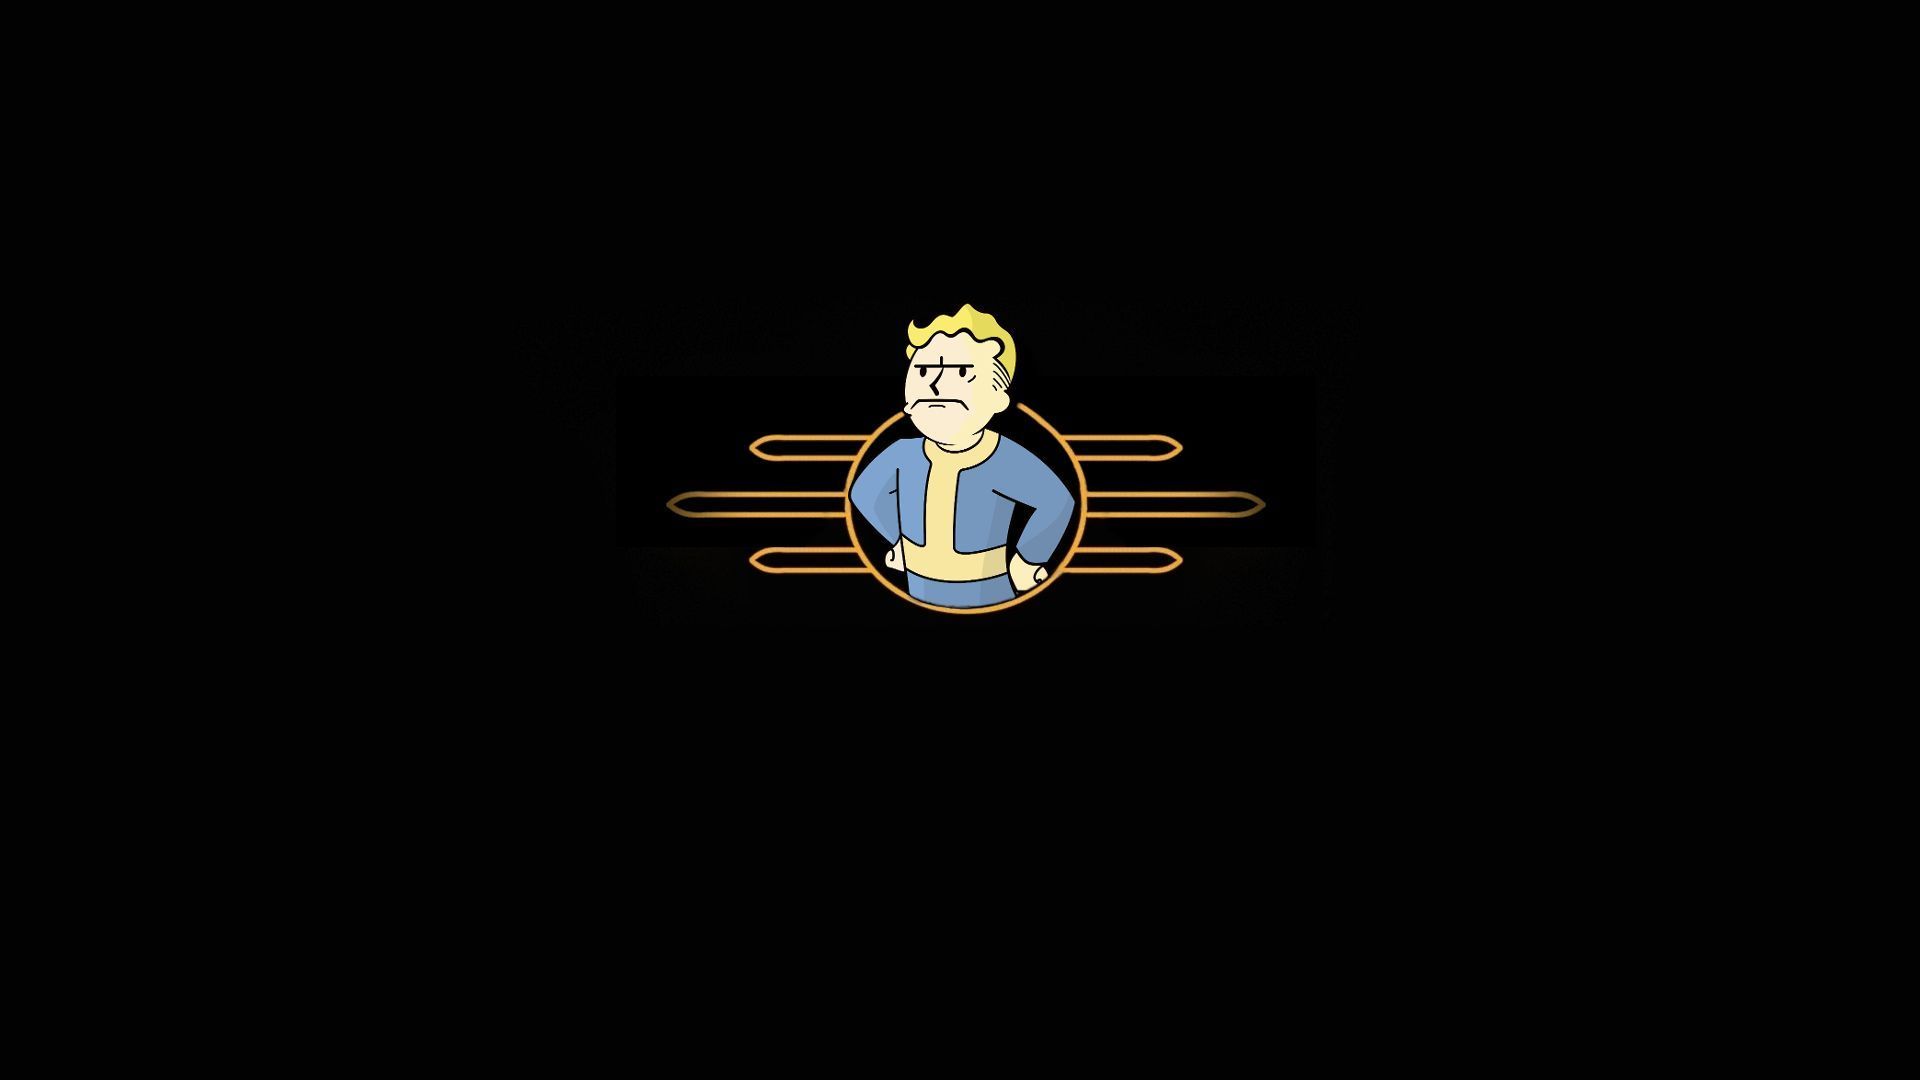 DeviantArt: More Like Another Fallout Wallpaper by VaughnWhiskey